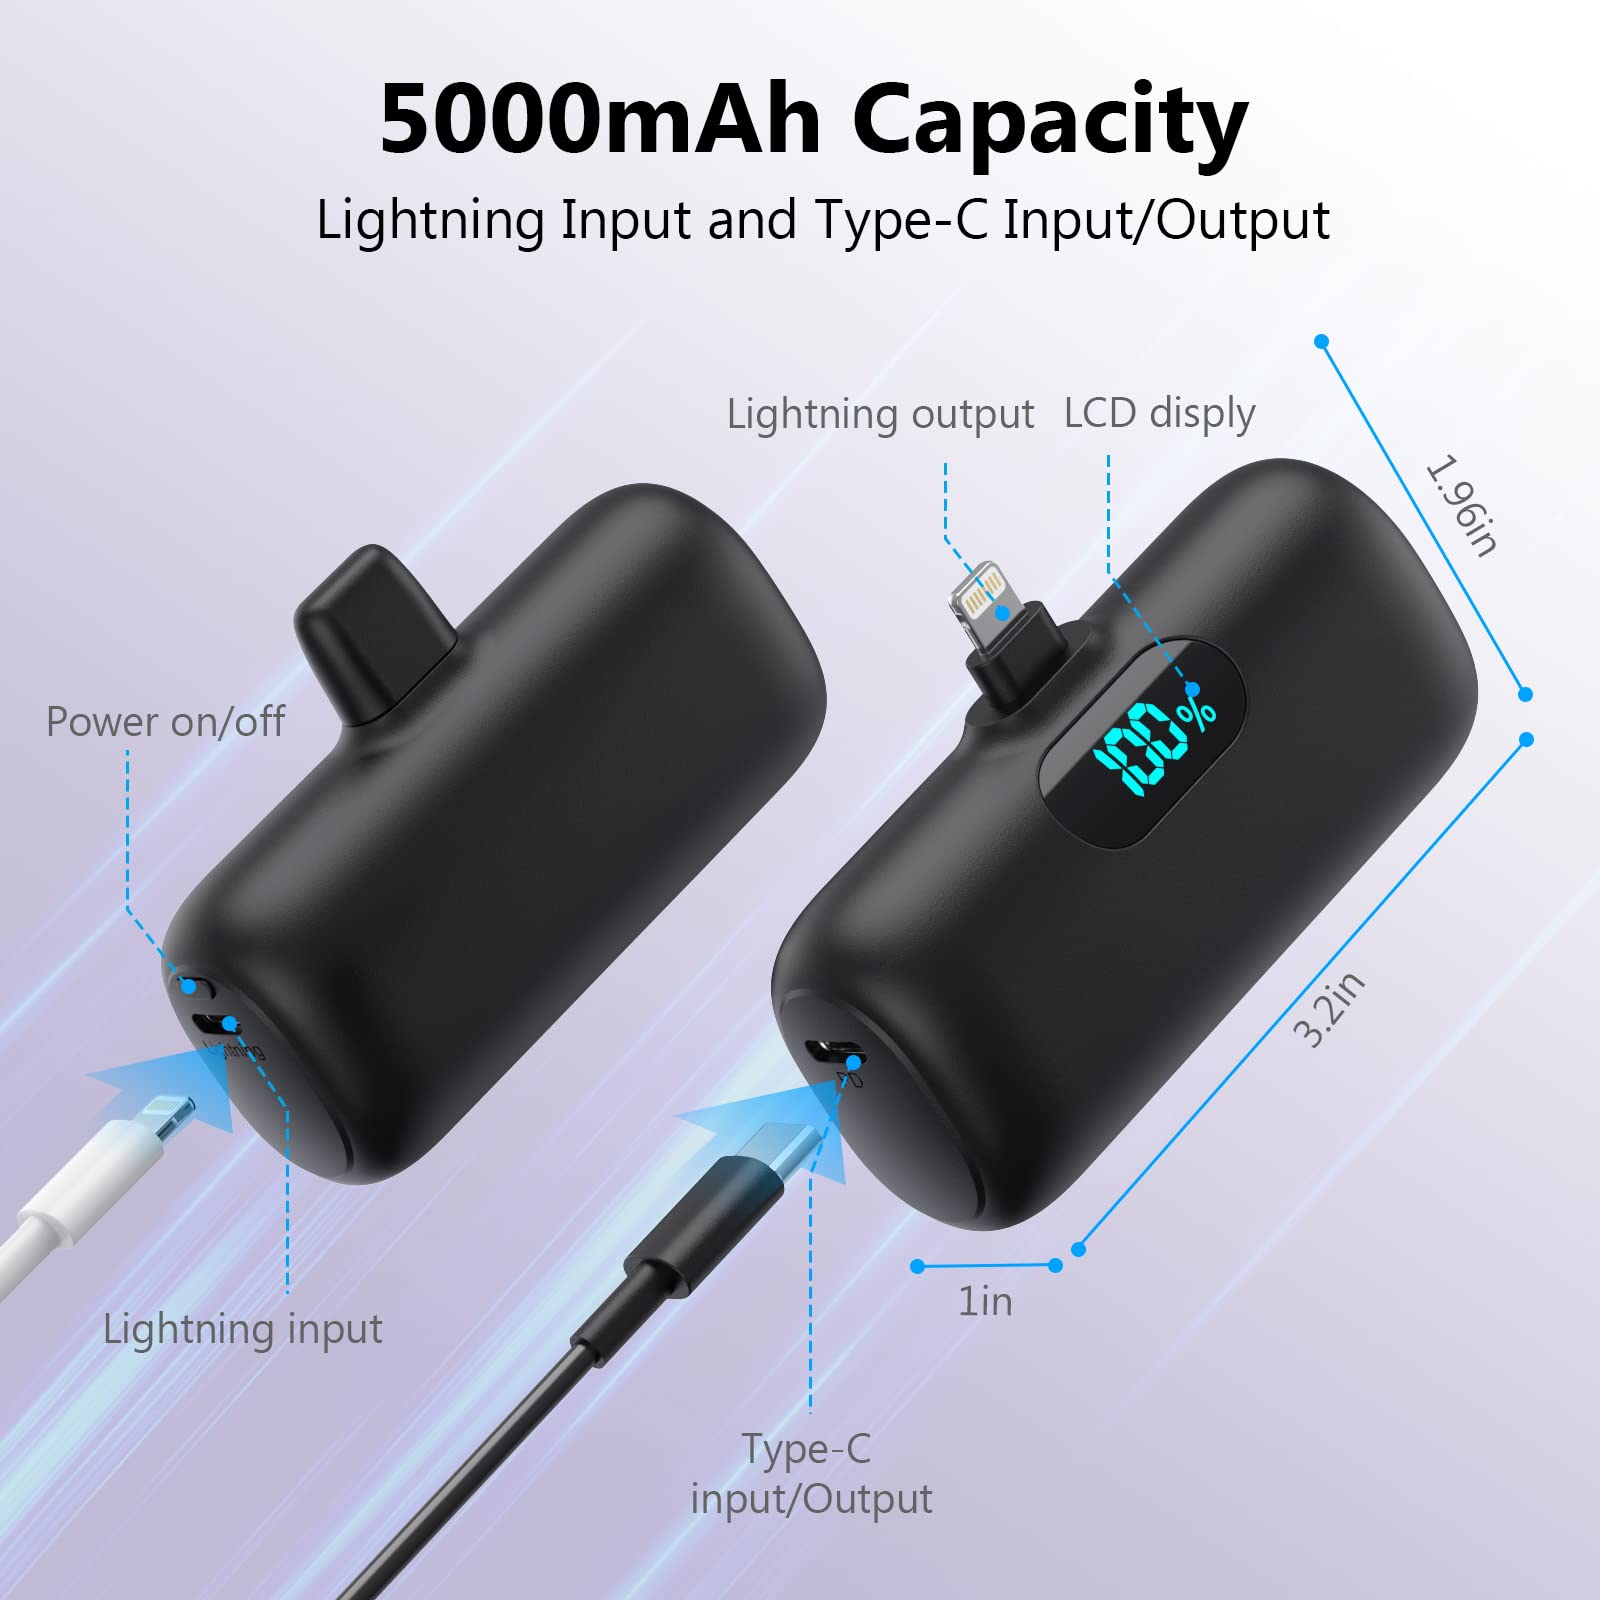 Feob Mini Portable Charger 5000mAh, Small & Ultra-Compact 15W PD Fast Charging Power Bank, LCD Display Cute Battery Pack Compatible with iPhone 14/14 Pro Max/13/13 Pro Max/12/11/XR/X/8/7/6 and More